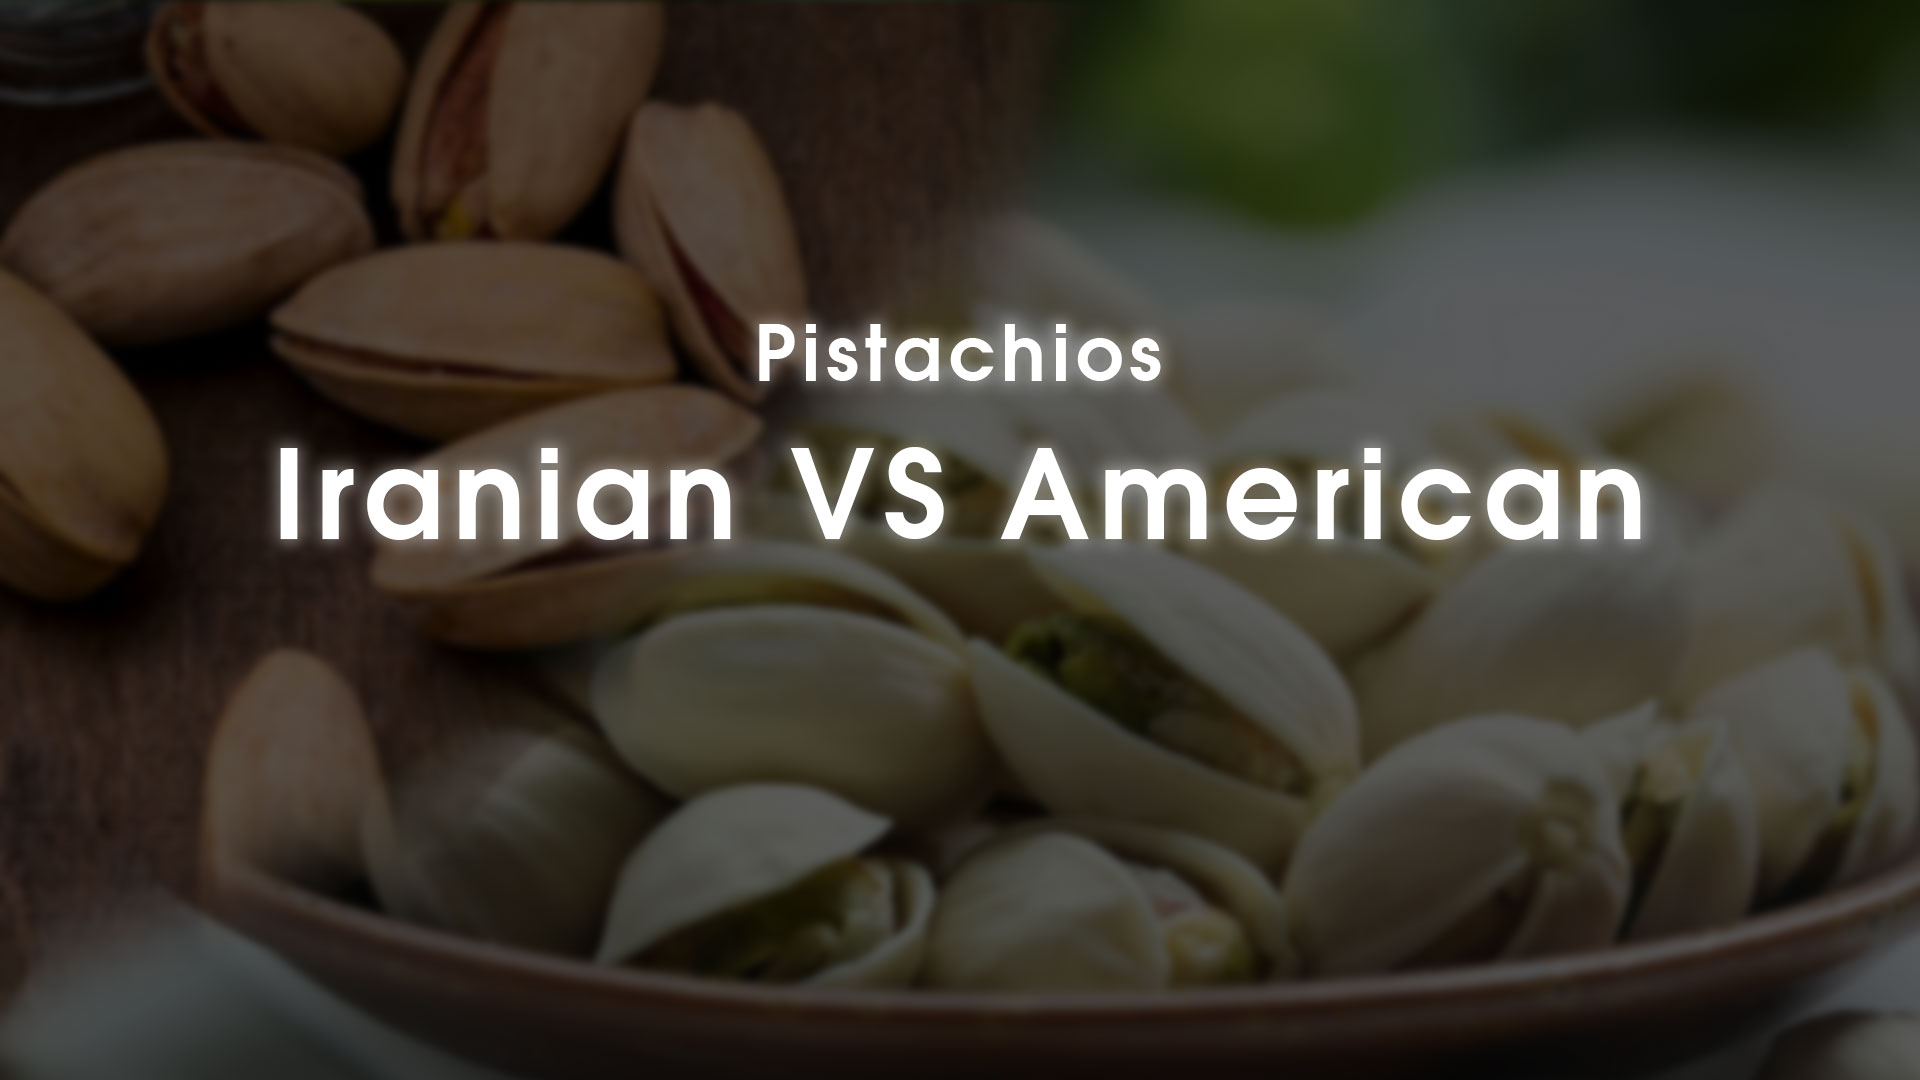 the-diffrance-between-iranian-and-California-pistachios